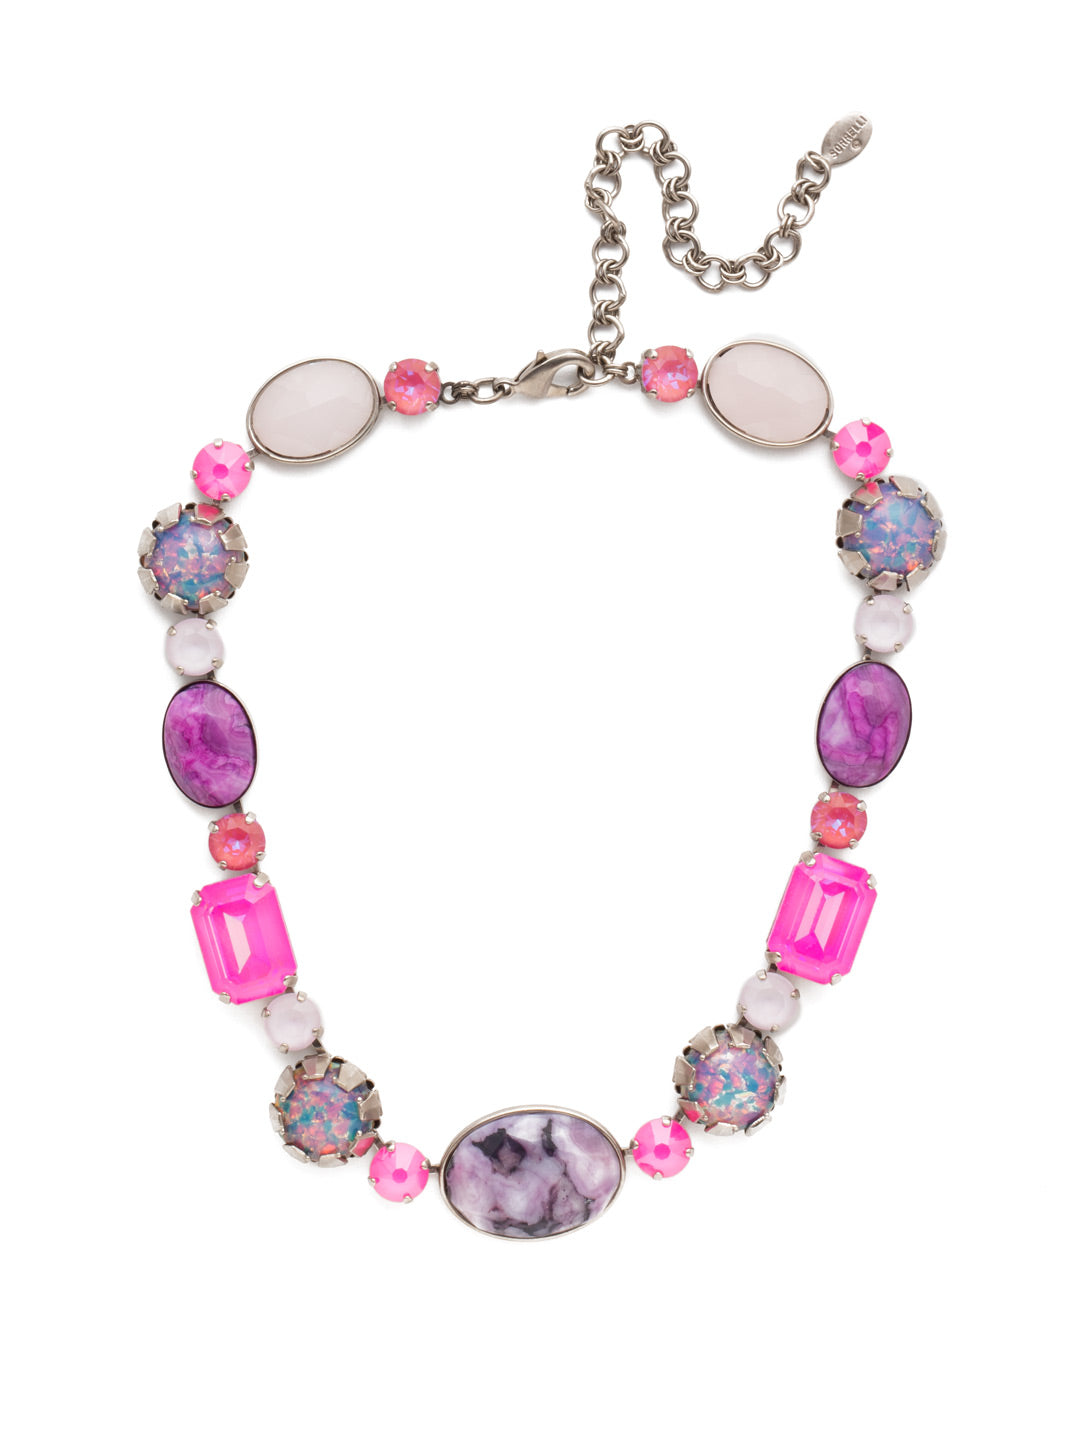 Tatiana Statement Necklace - NEP57ASETP - Big and bold. That's the Tatiana Statement Necklace. A mix of natural, semi-precious stones and super-sparkly crystals come together in a piece that demands to be taken seriously. From Sorrelli's Electric Pink collection in our Antique Silver-tone finish.